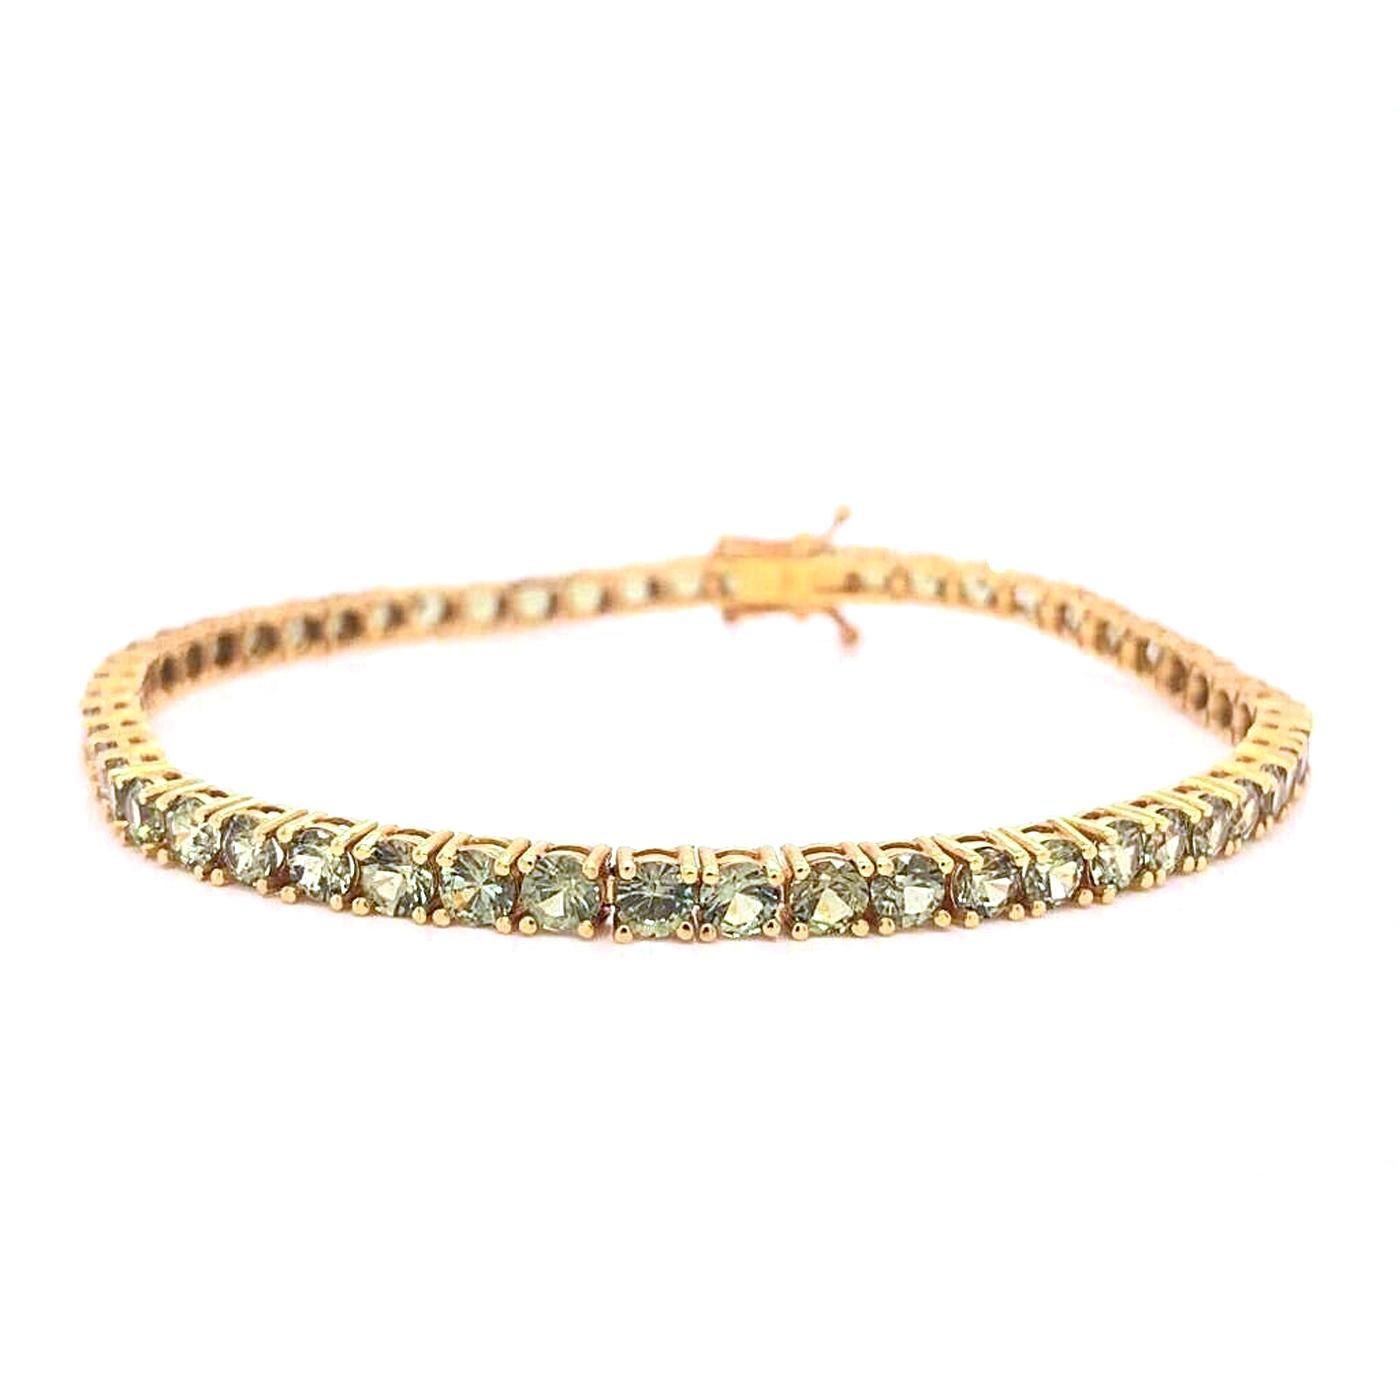 This classic style tennis bracelet features Round Brilliant Cut Natural Green Stones. 
Sparkling and slim, this gemstone tennis-style bracelet complements any attire. Fashioned in Yellow Gold, this 8.0-inch bracelet secures with a tongue and groove